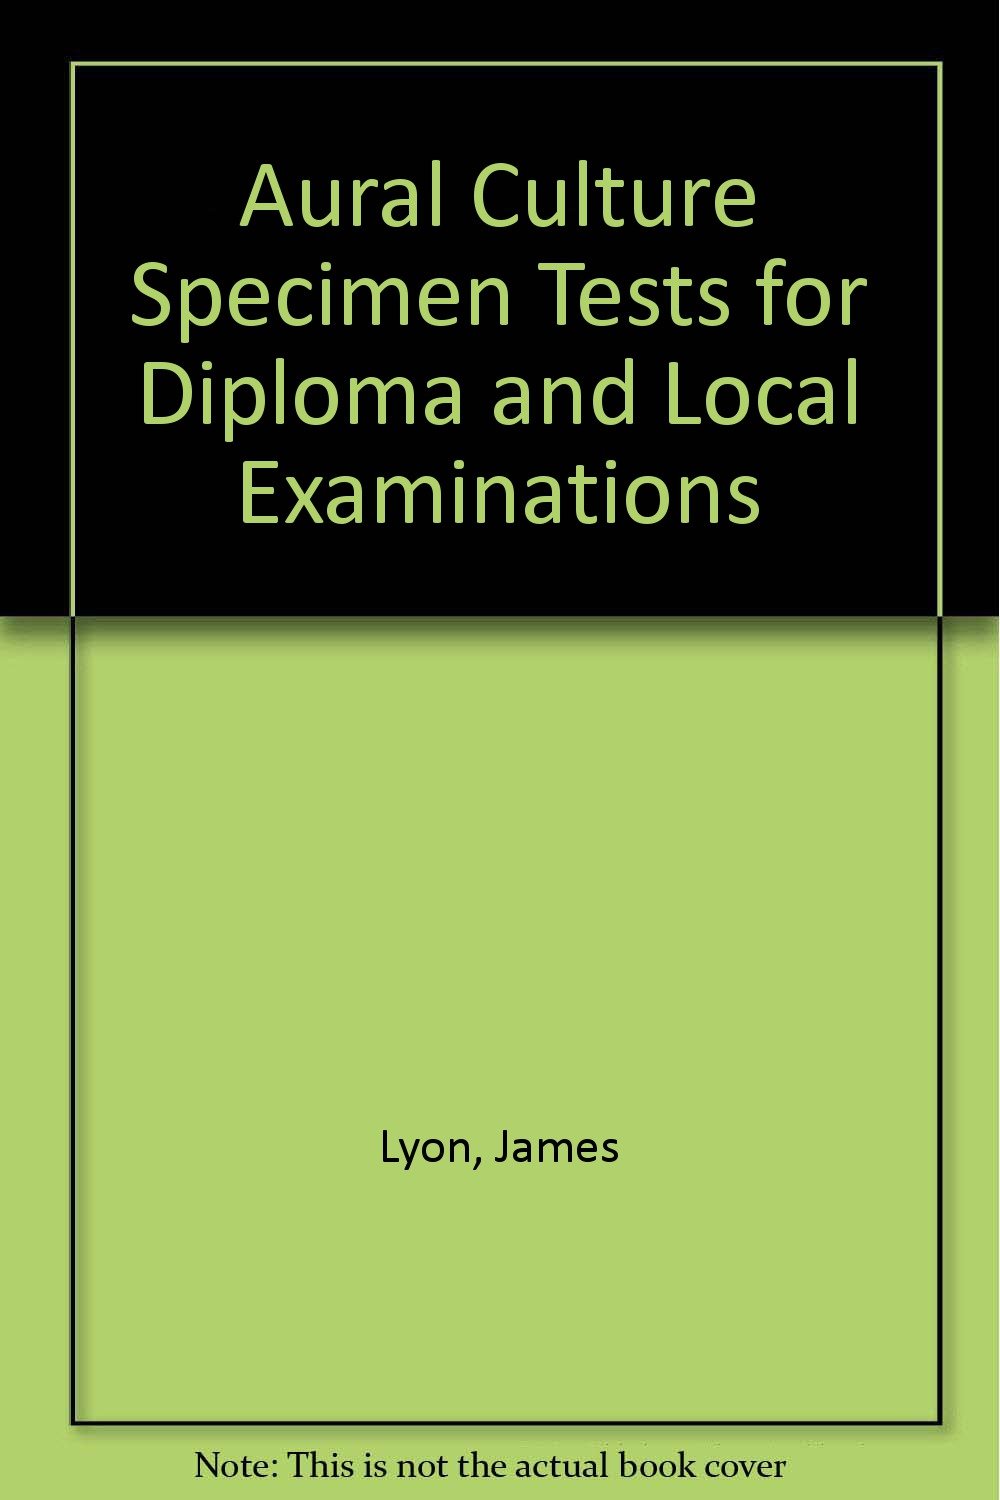 Aural Culture Specimen Tests for Diploma and Local Examinations Lyon, James